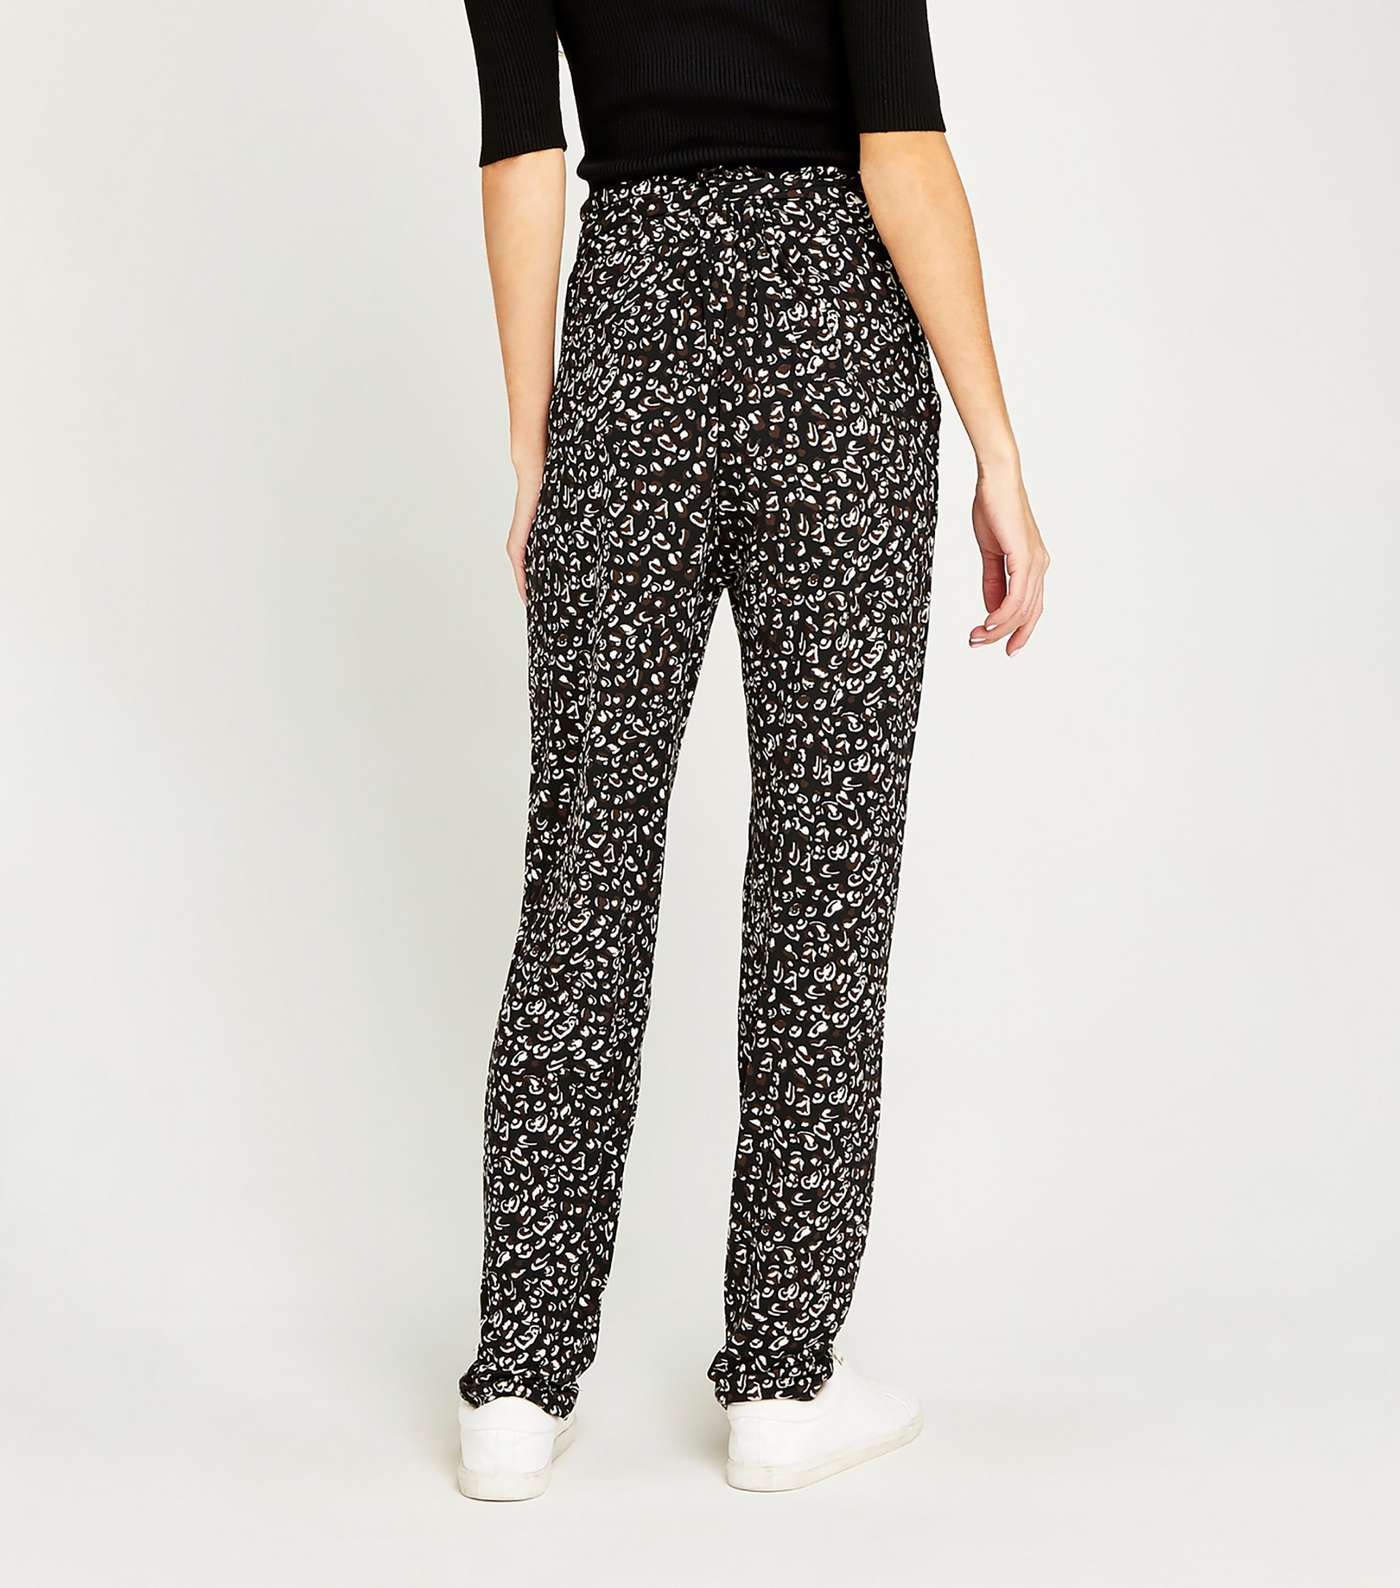 Apricot Brown Leopard Print Soft Touch Trousers Image 3